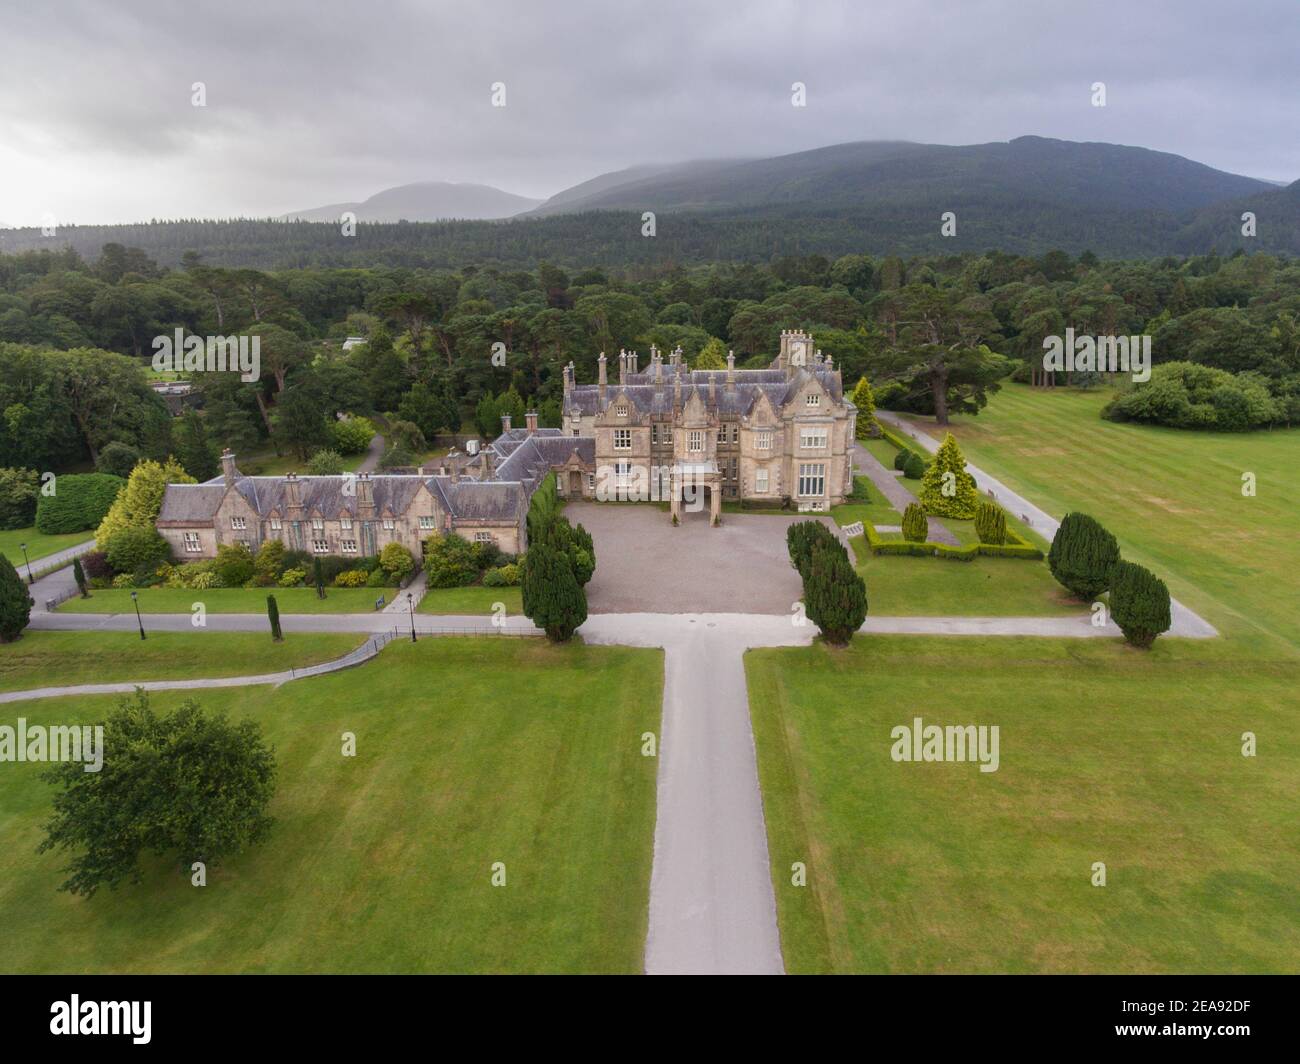 Aerial view of Muckross House and Gardens in Killarney, County Kerry, Ireland. Stock Photo